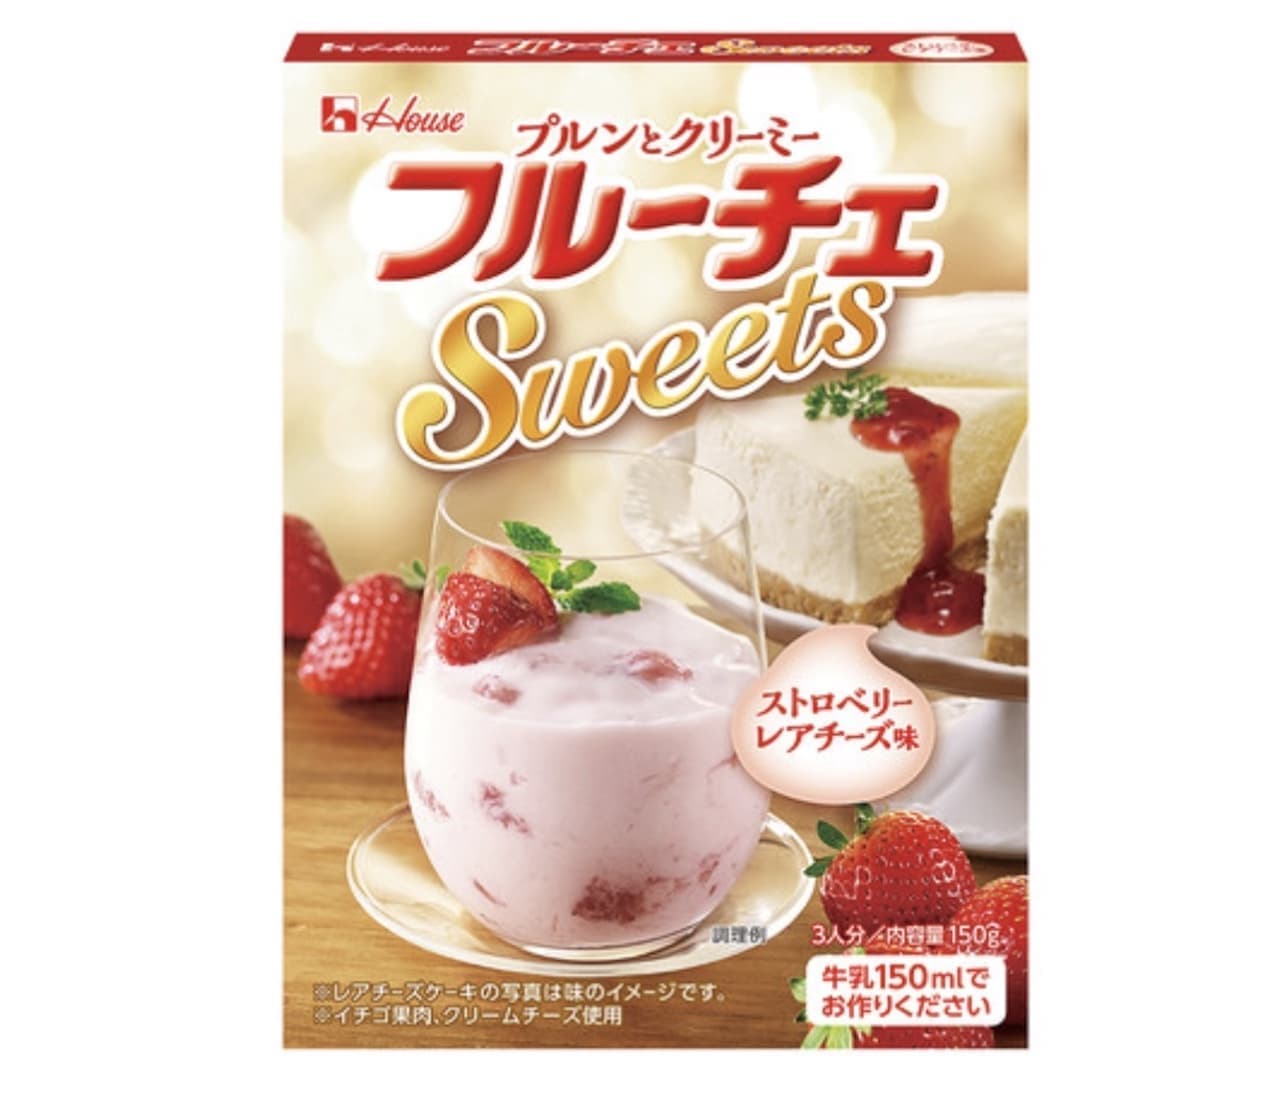 "Fruche Sweets [Strawberry Rare Cheese Flavor]" Creamy and rich taste